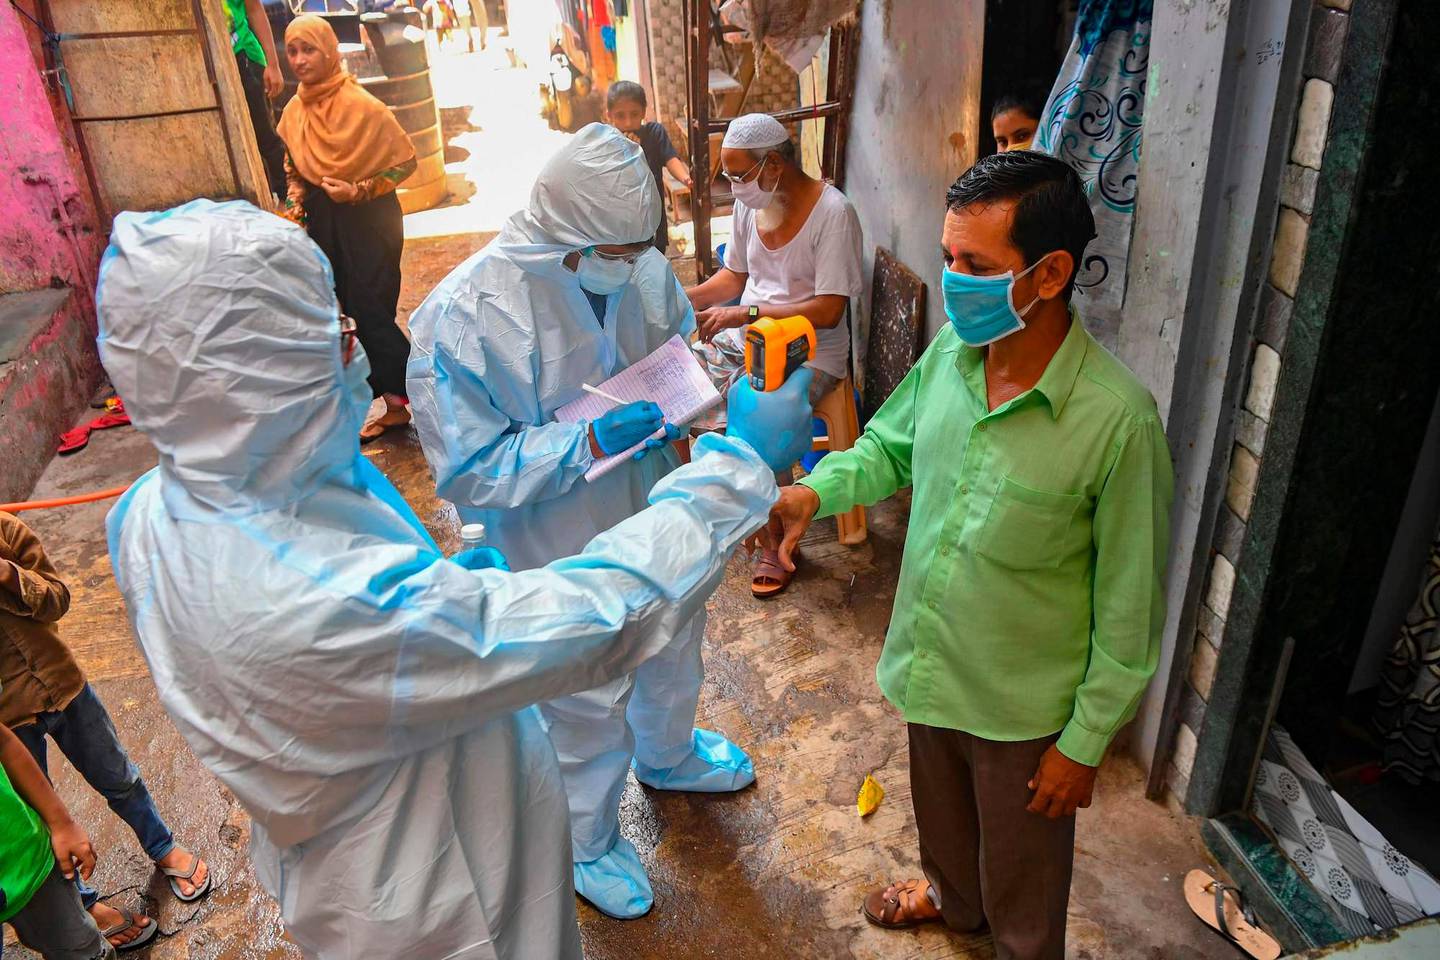 Medical staff wearing Personal Protective Equipment (PPE) gear conduct a door-to-door medical screening inside Dharavi slums to fight against the spread of the COVID-19 coronavirus, in Mumbai on June 24, 2020. - The epidemic has badly hit India's densely populated major cities -- including the national capital New Delhi and the financial hub Mumbai -- with reports of hospitals being overwhelmed and patients struggling to find beds. (Photo by INDRANIL MUKHERJEE / AFP)